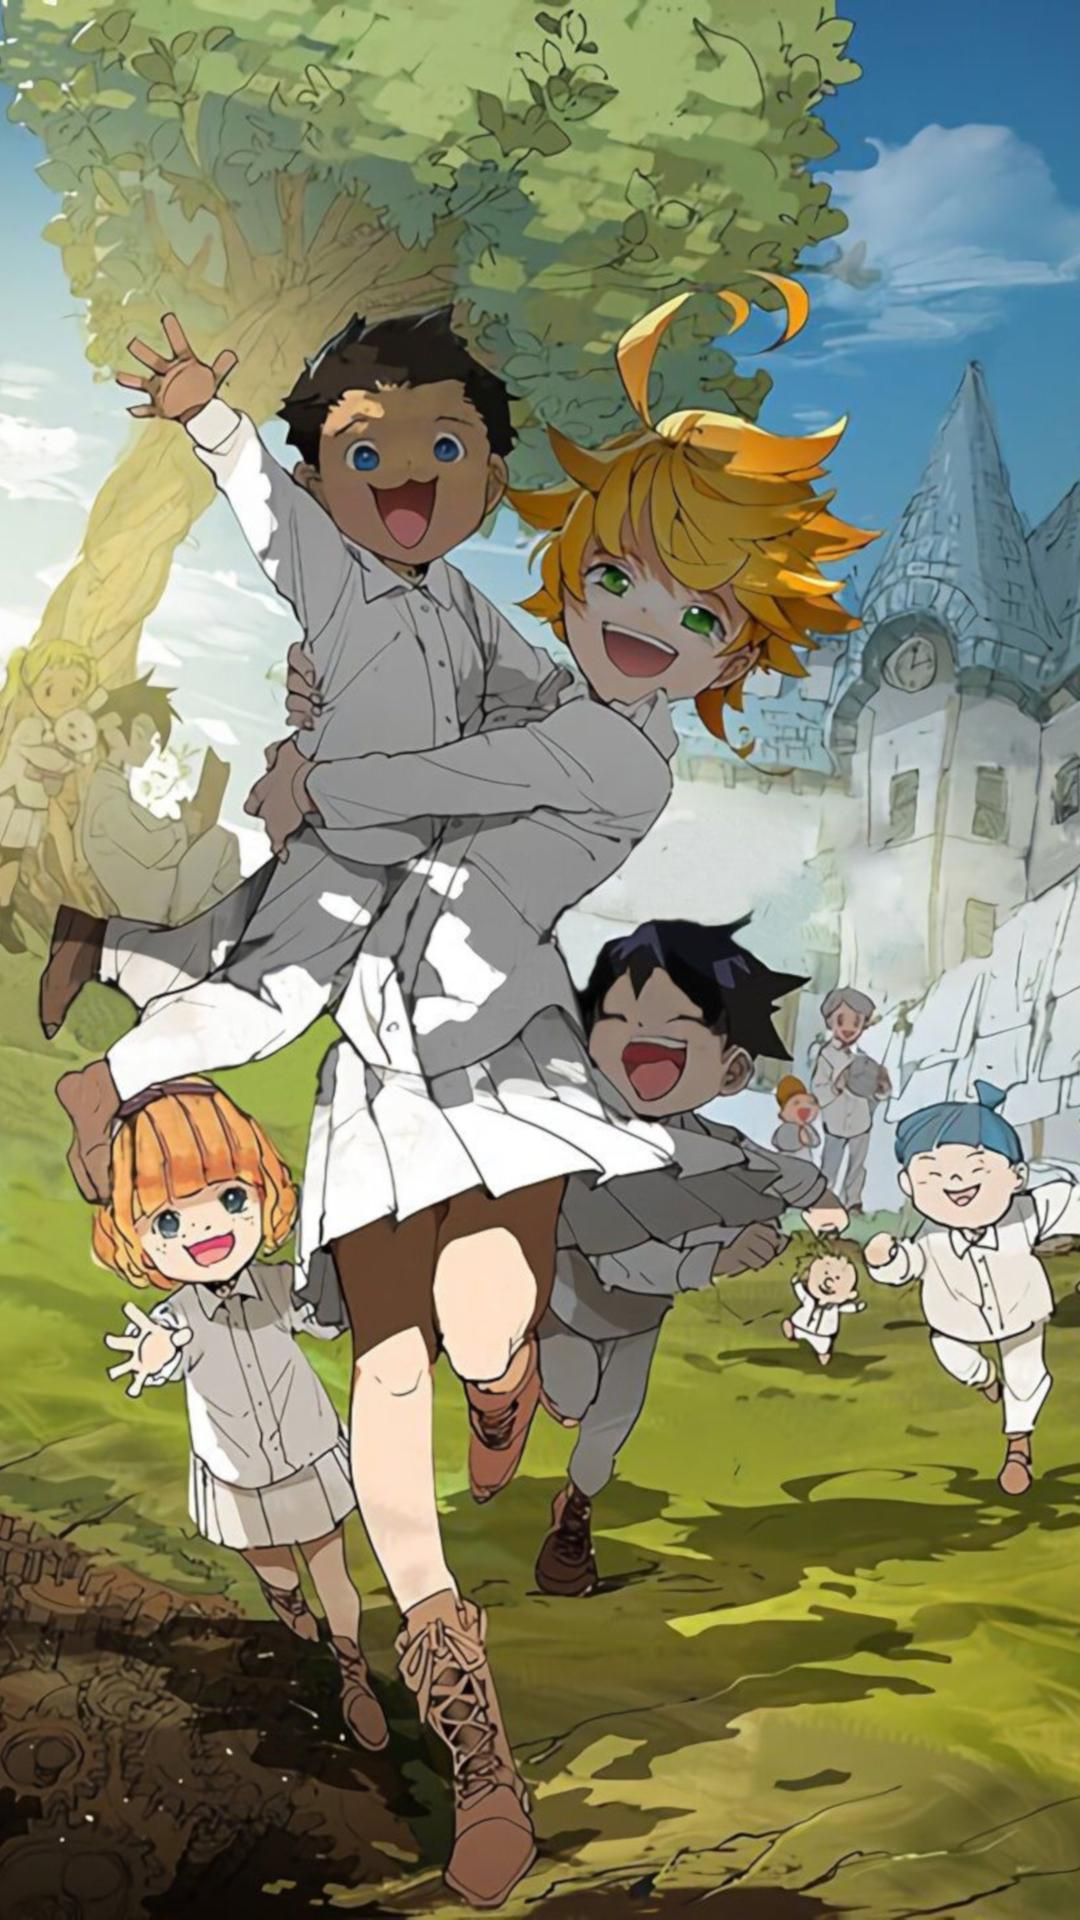 1080x1920 The Promised Neverland Wallpapers Top 65 Best The Promised Neverland Backgrounds